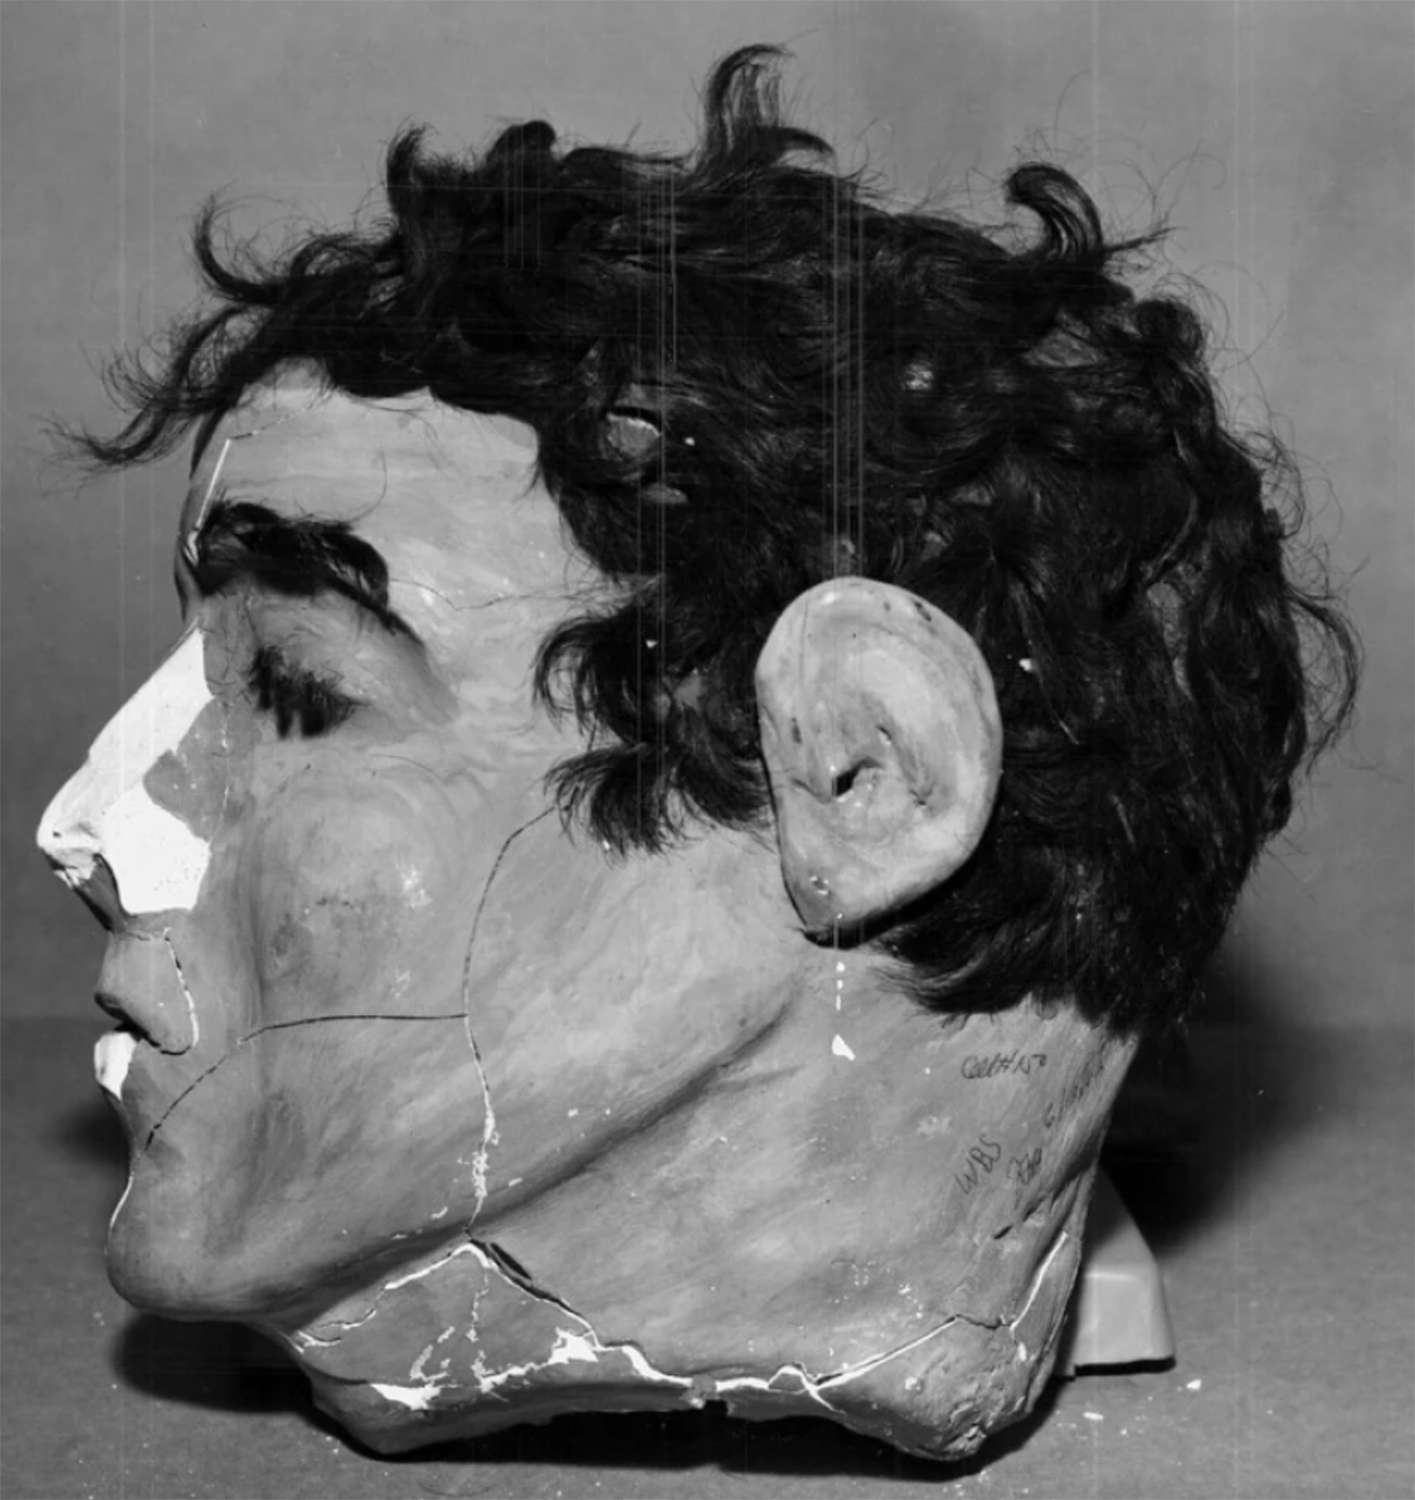 Profile of the dummy head found in Morris’ cell. The broken nose happened when the head rolled off the bed and hit the floor after a guard reached through the bars and pushed it, according to the U.S. Marshal’s website.